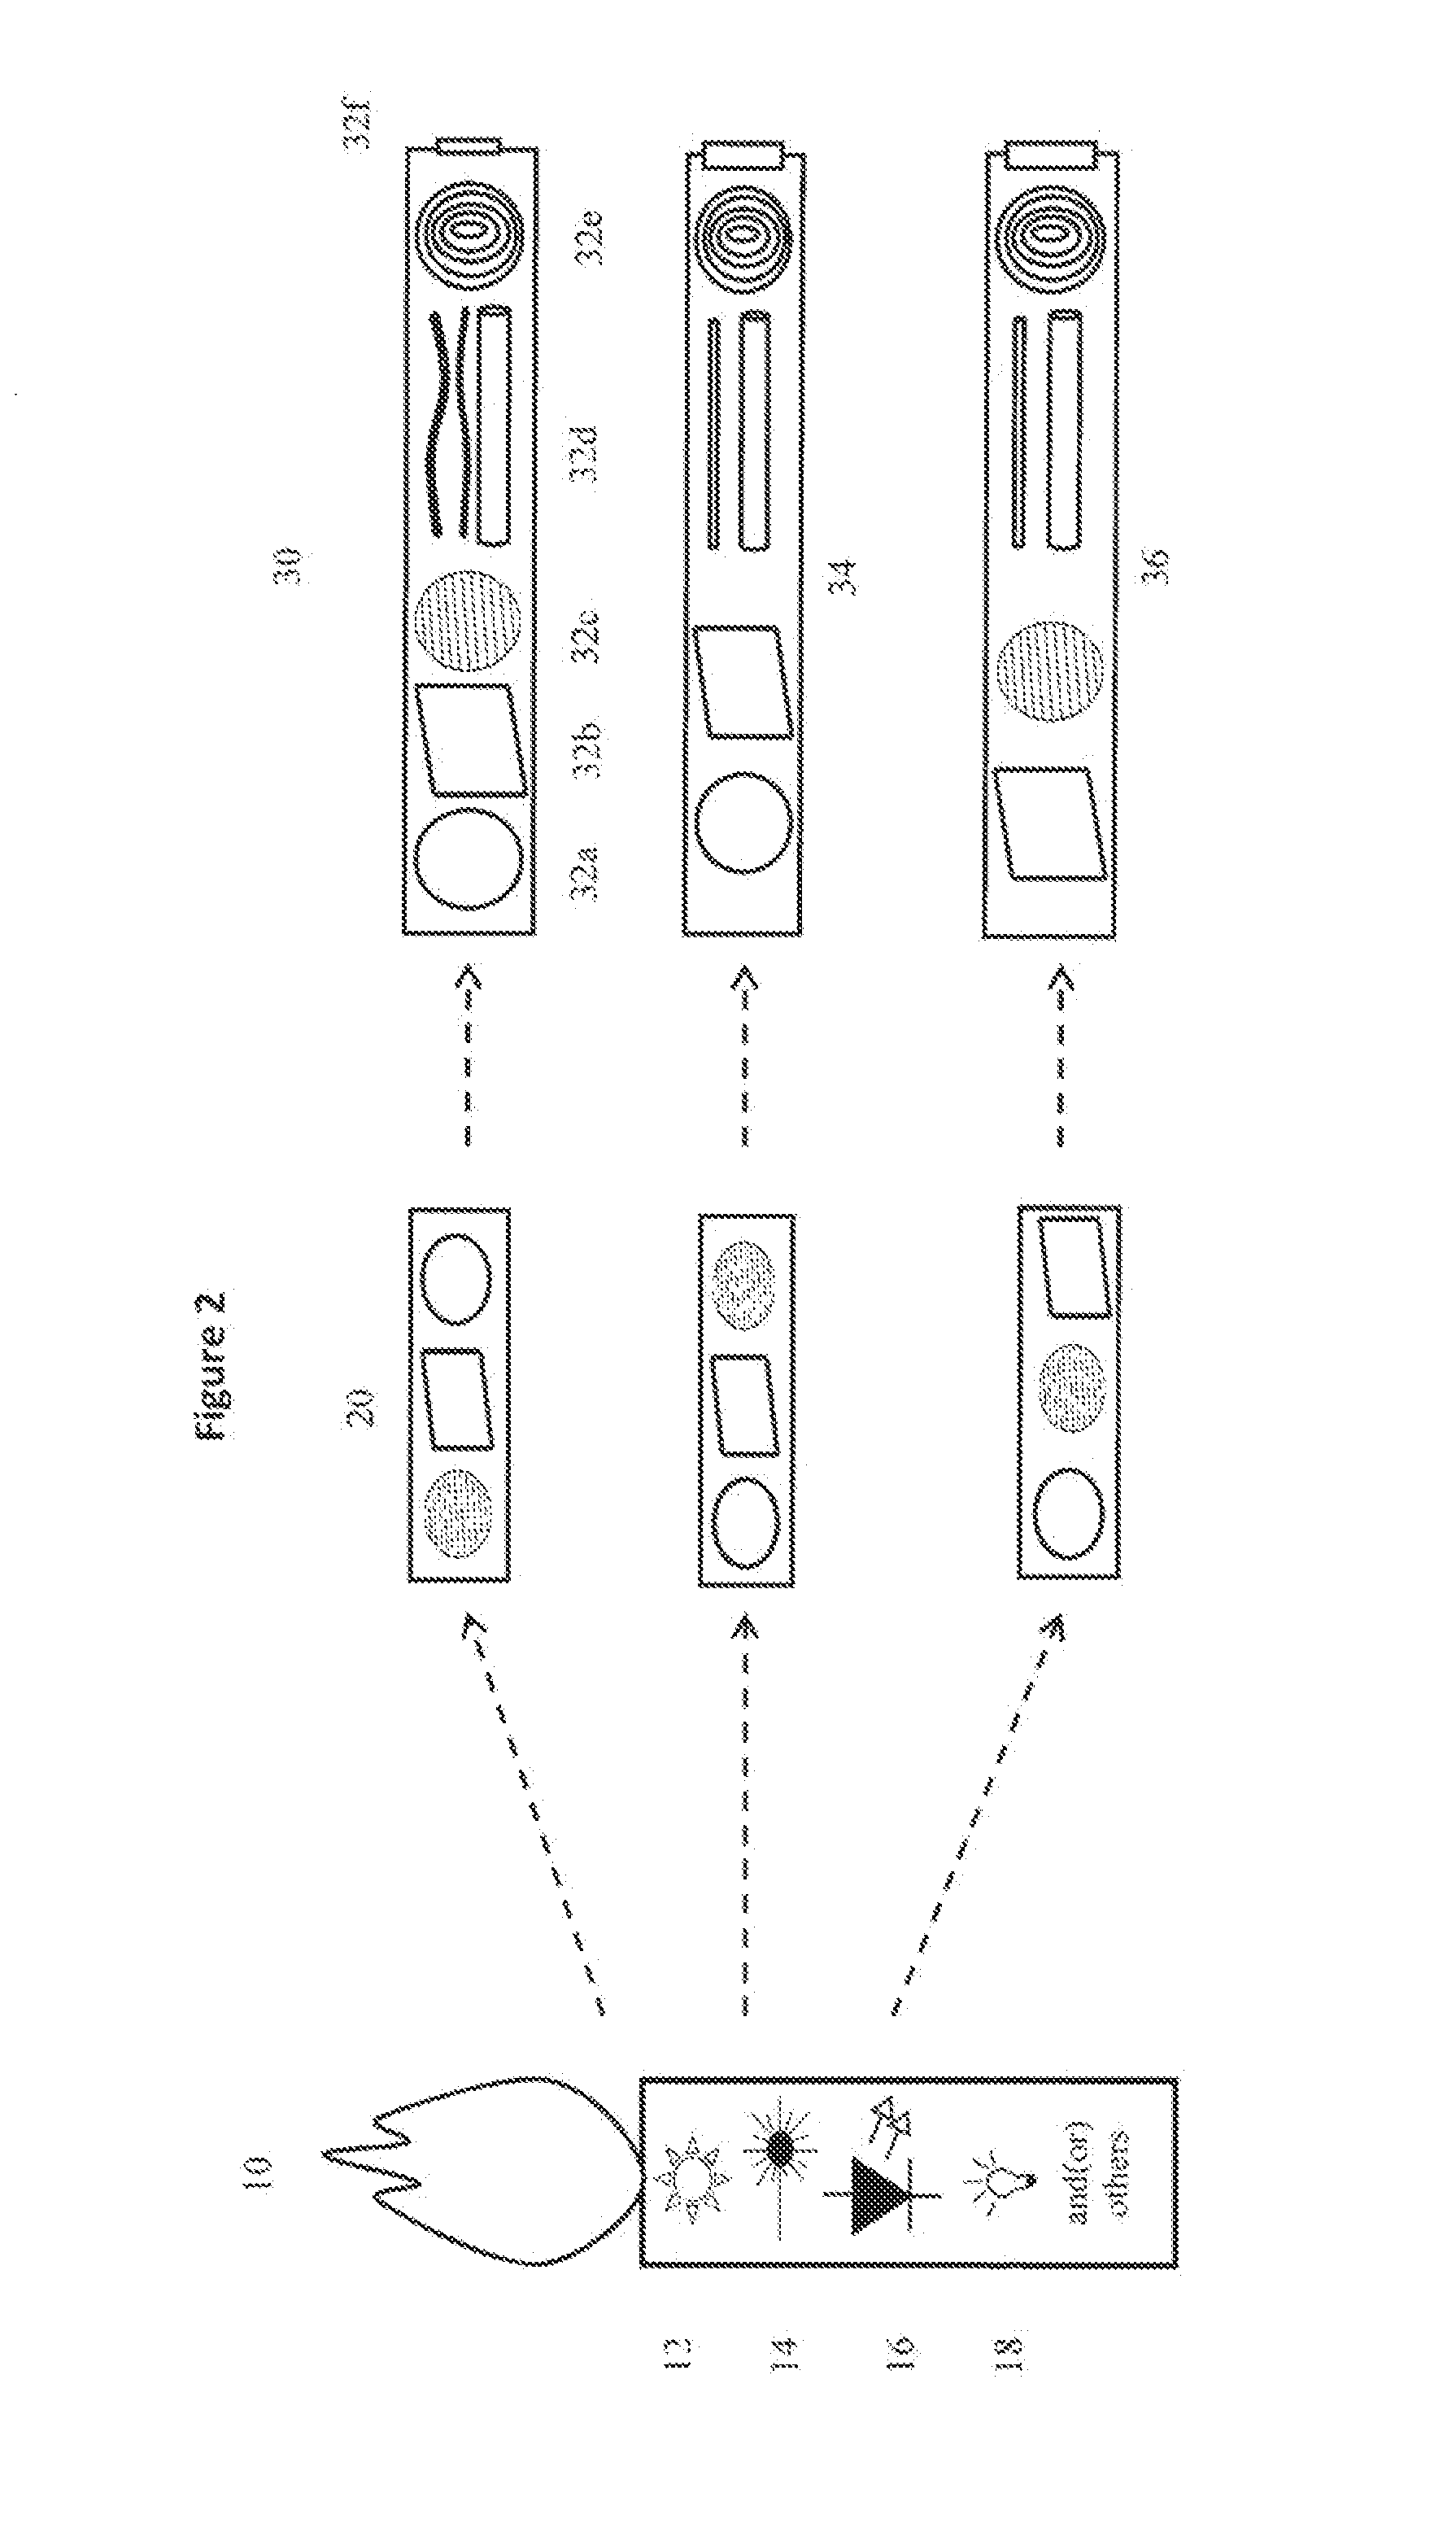 Apparatus and method for optimizing data capture and data correction for spectroscopic analysis